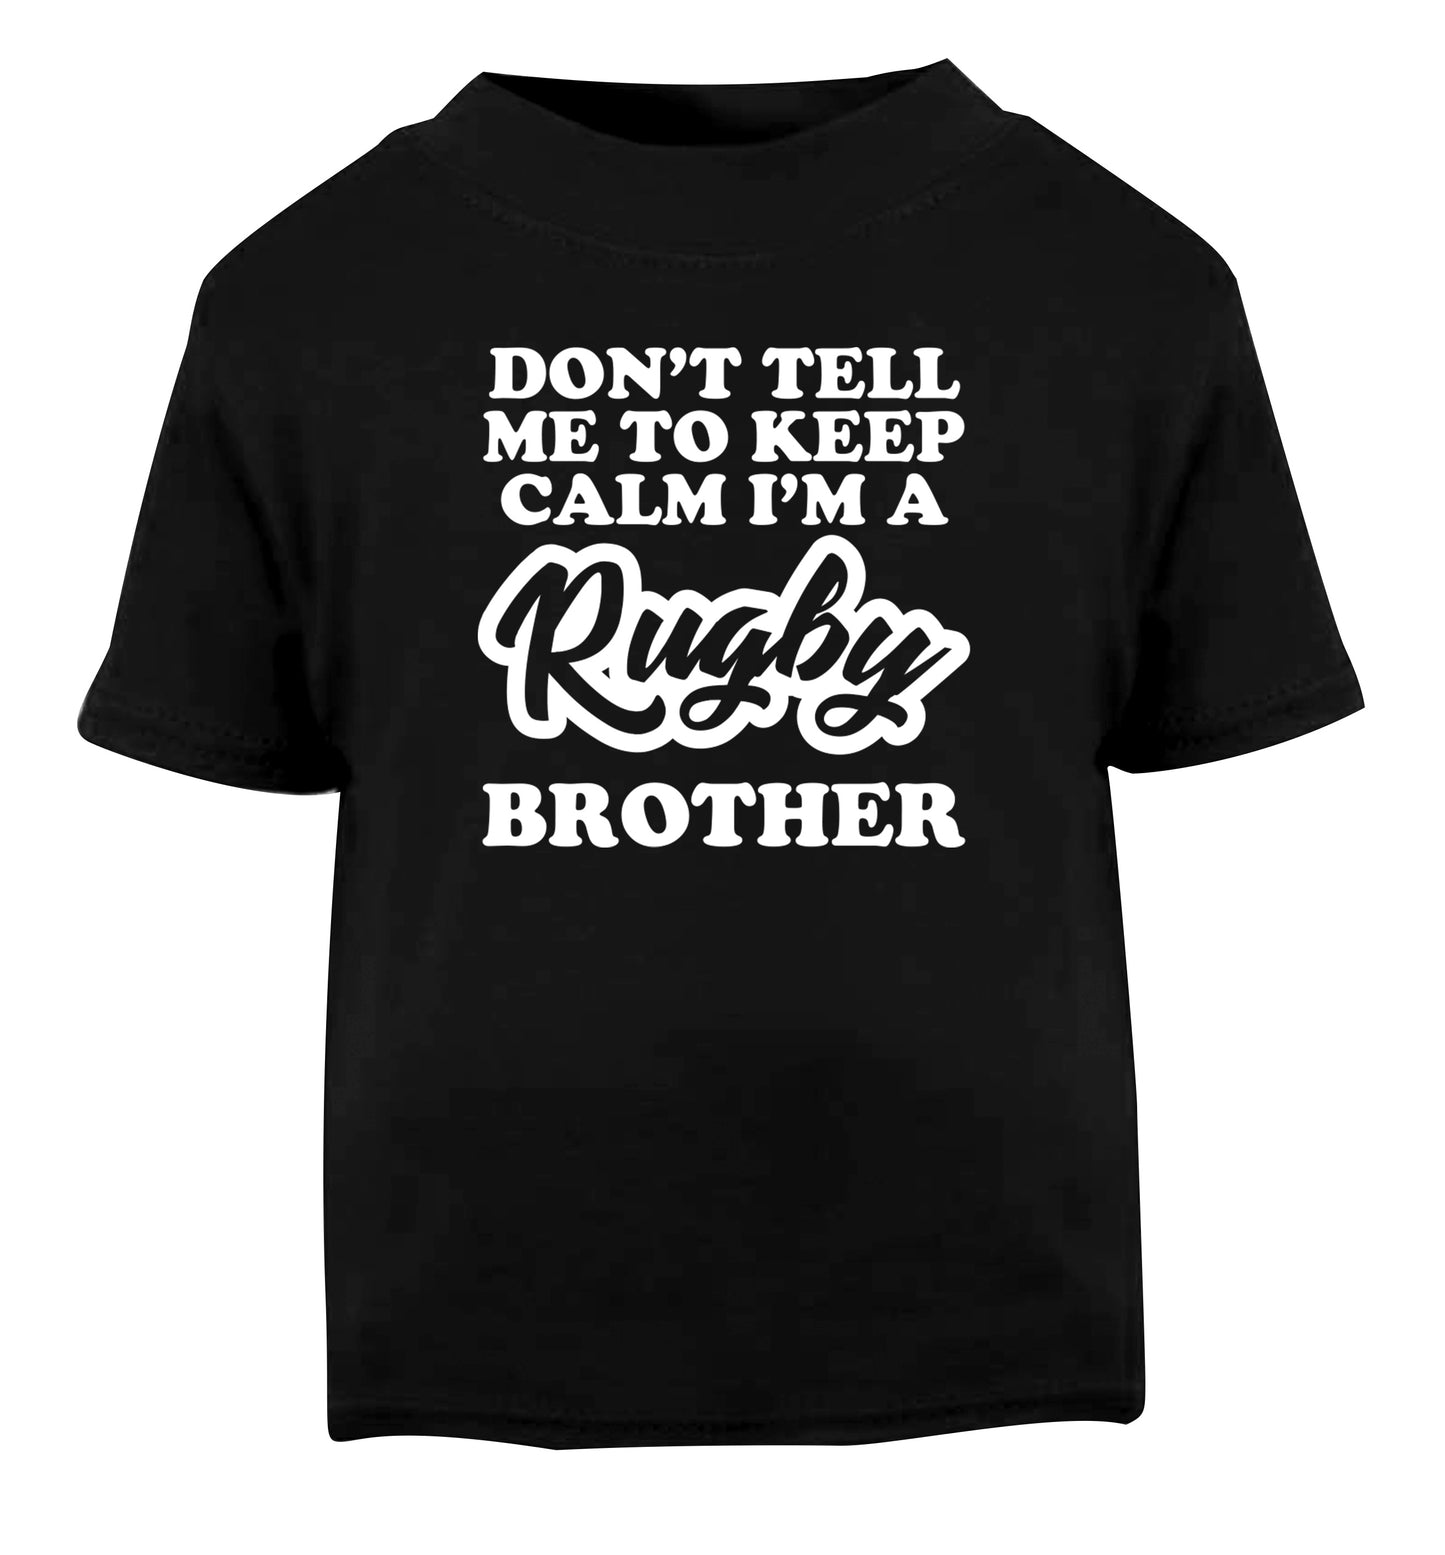 Don't tell me keep calm I'm a rugby brother Black Baby Toddler Tshirt 2 years